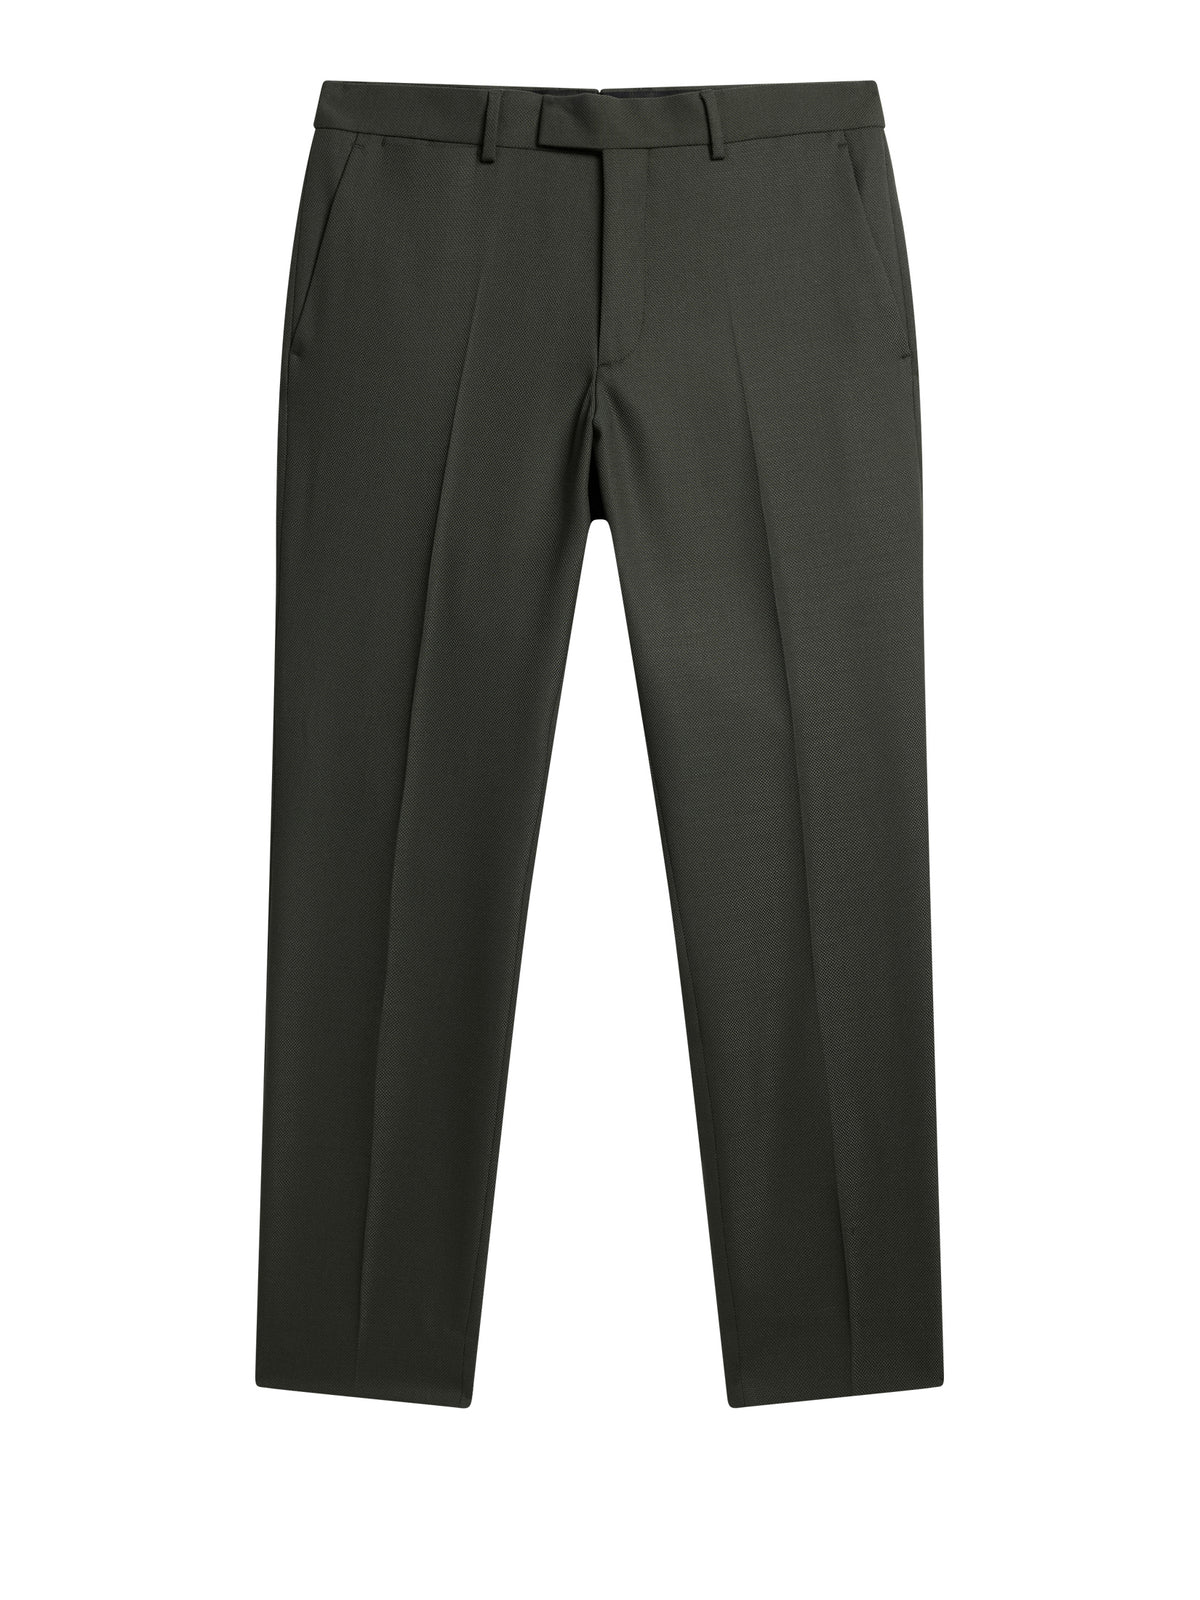 Grant Active Hopsack Pants / Forest Green